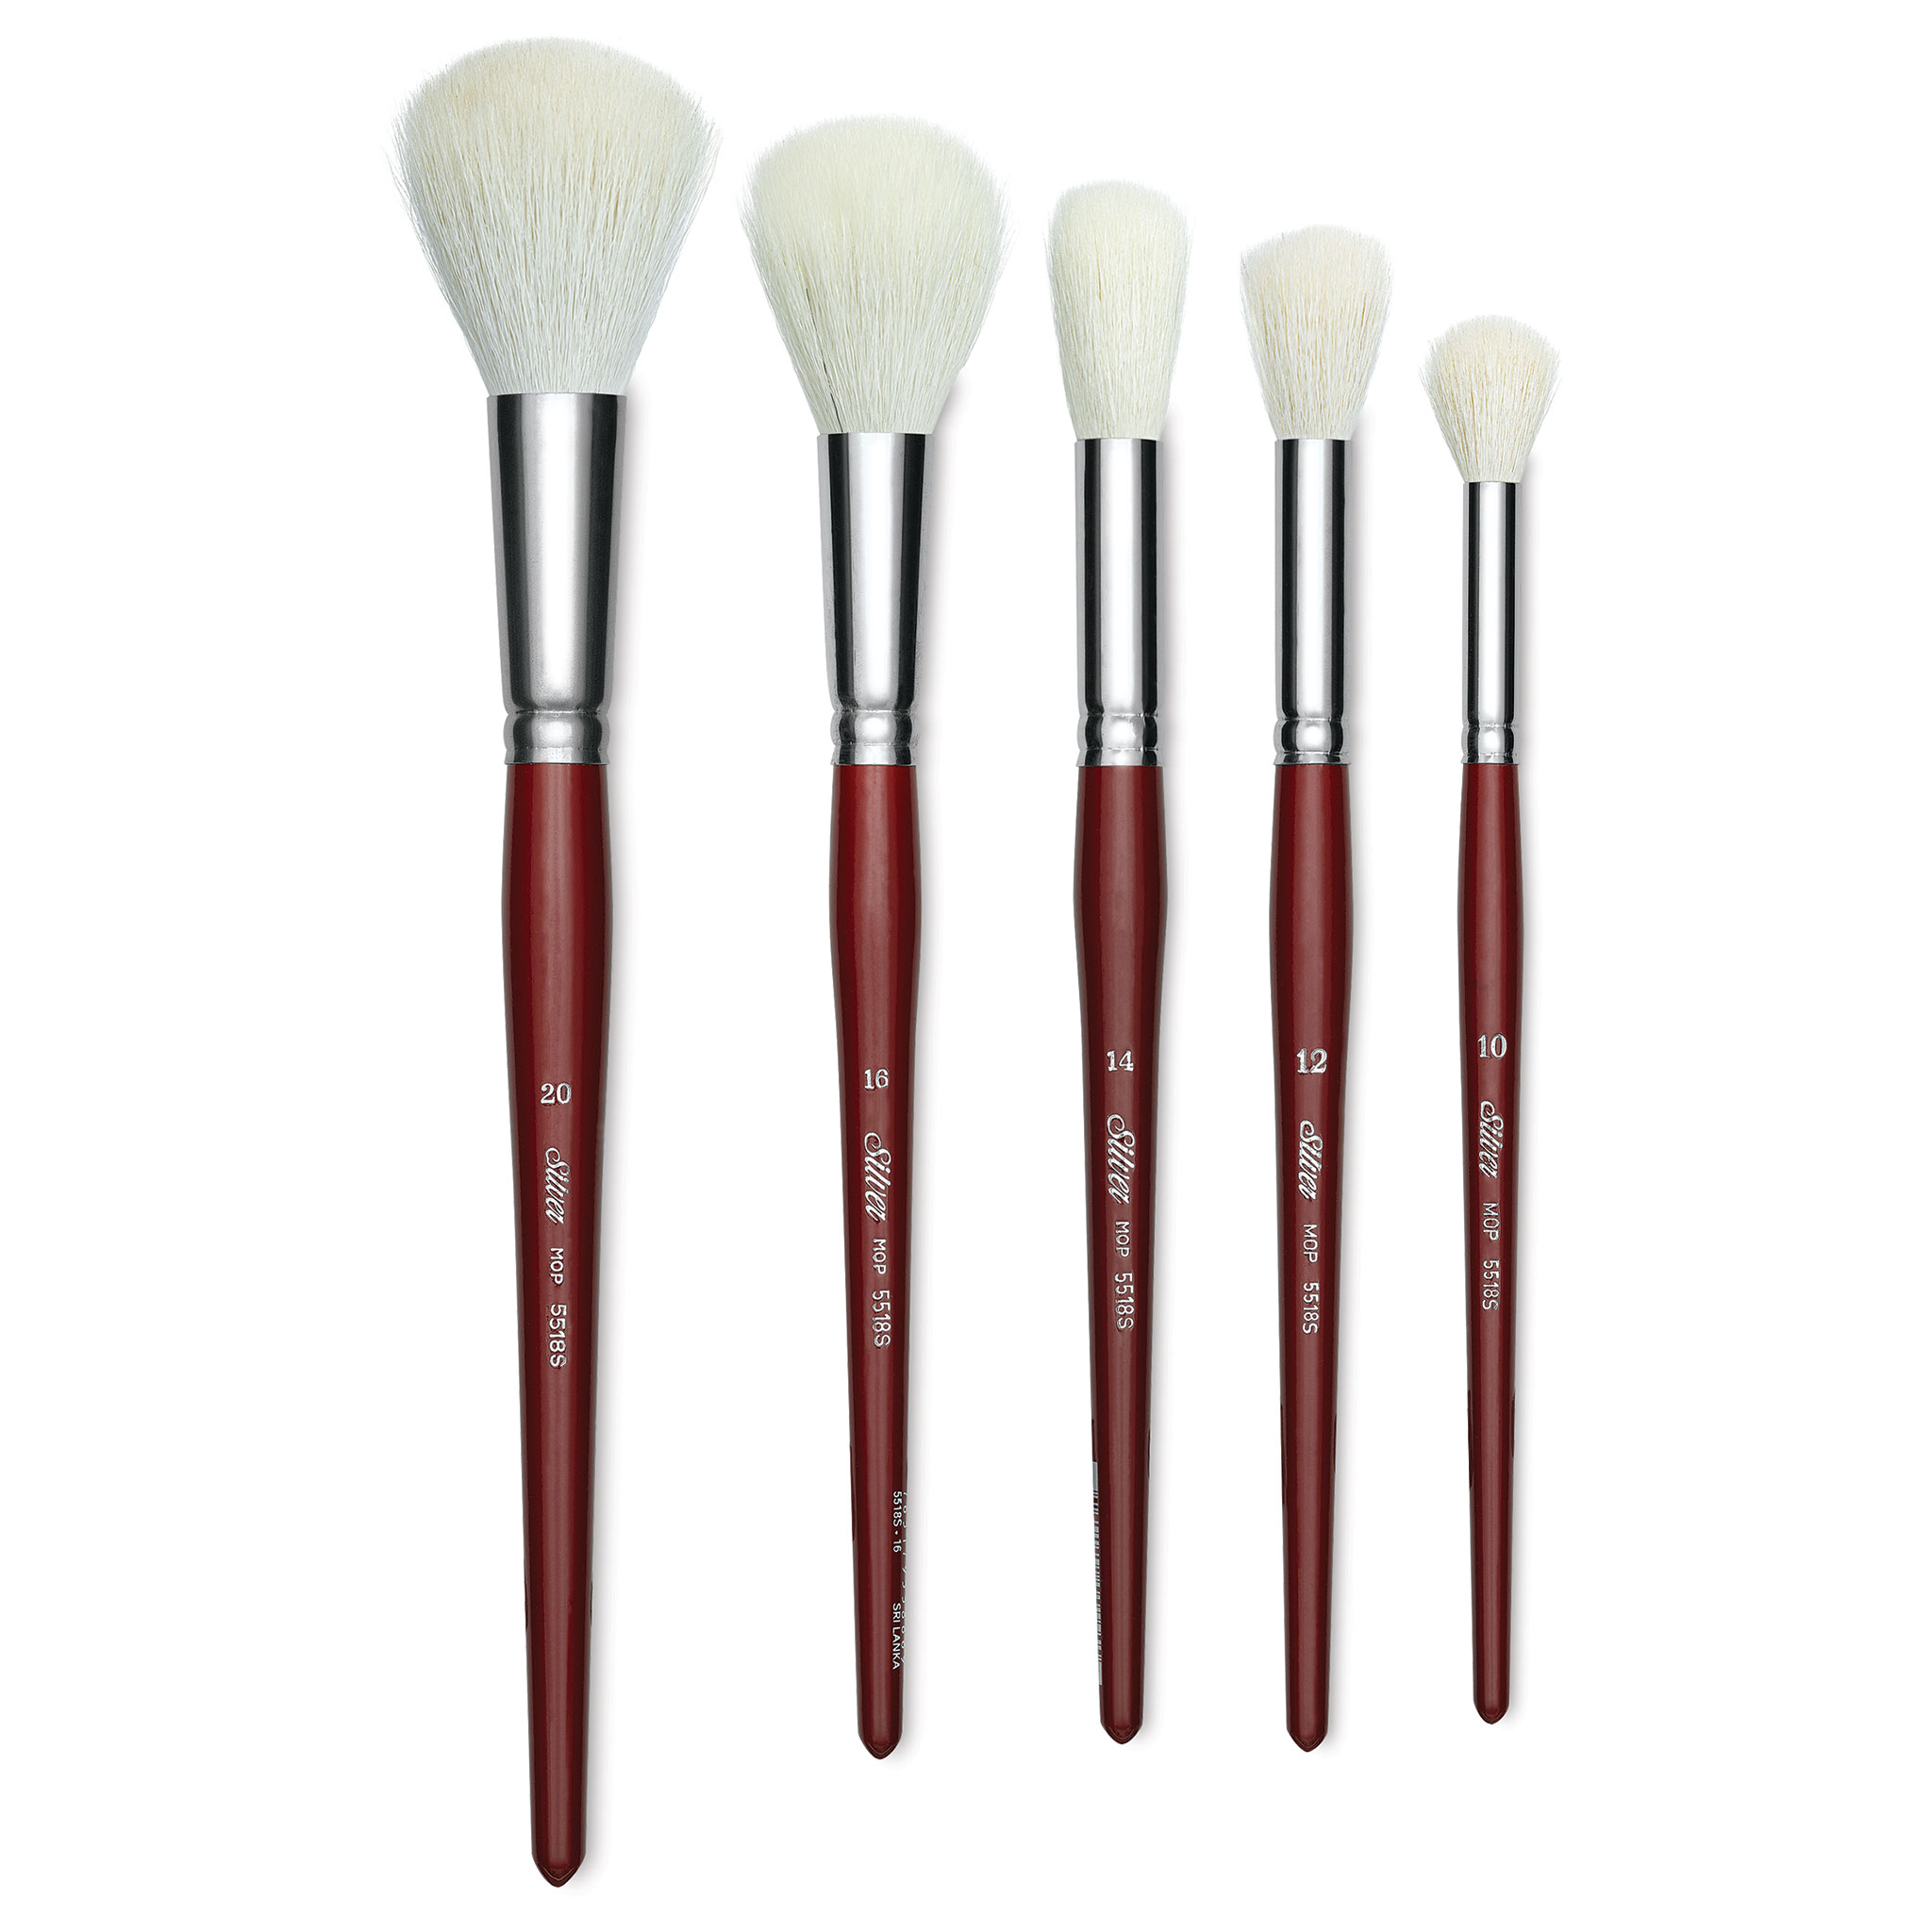 White Round Mop Series 5518S by Silver Brush - Brushes and More